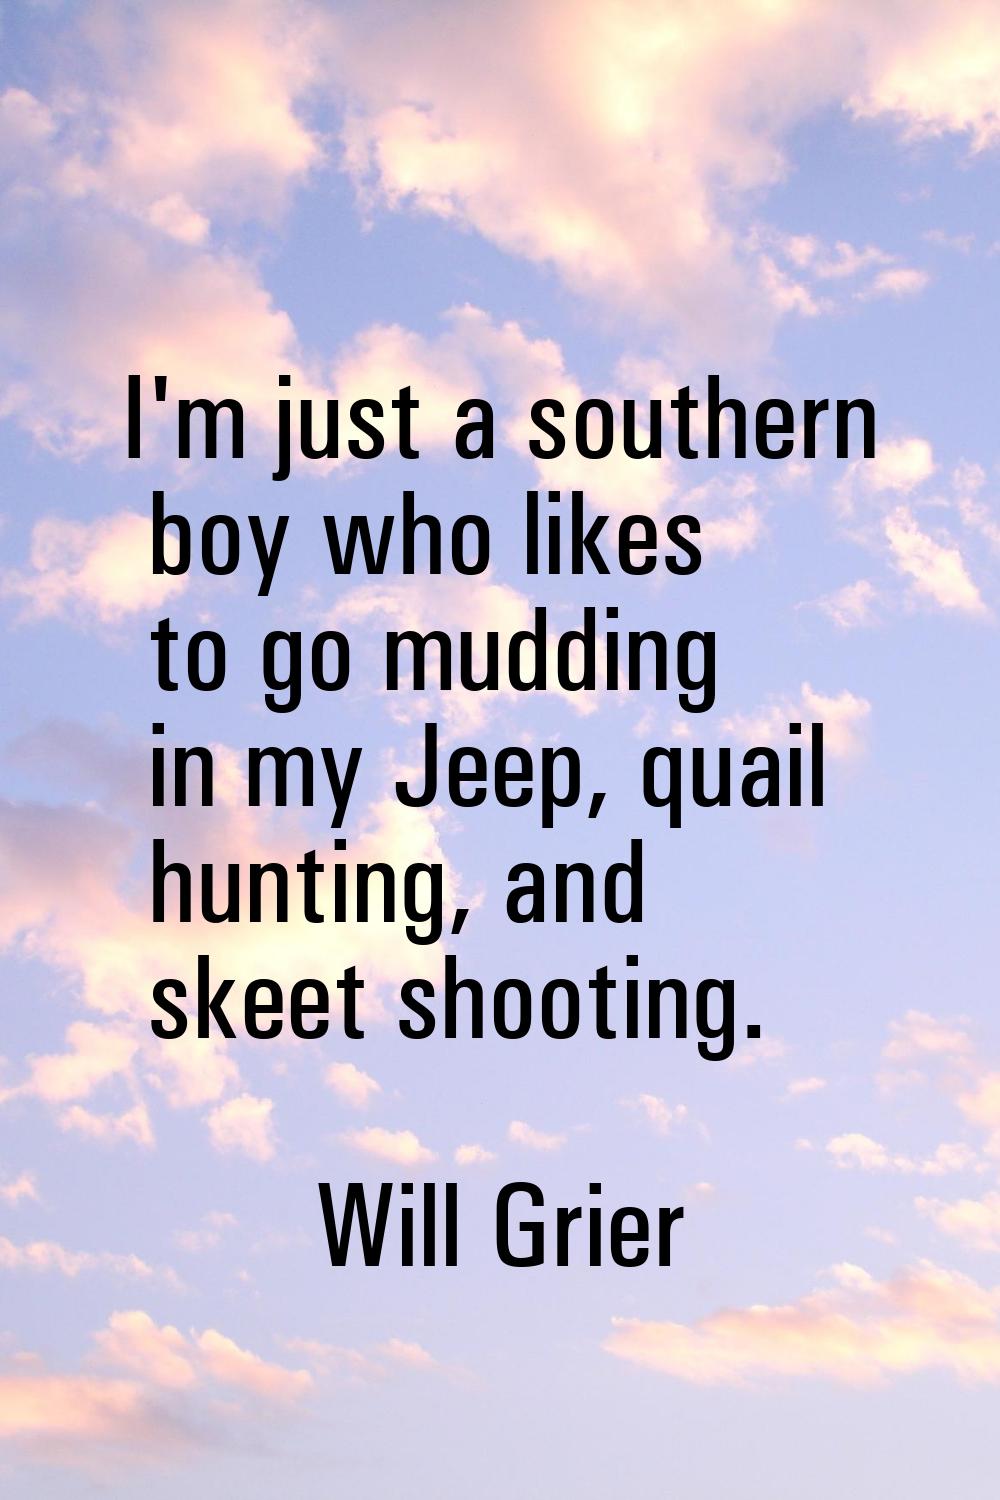 I'm just a southern boy who likes to go mudding in my Jeep, quail hunting, and skeet shooting.